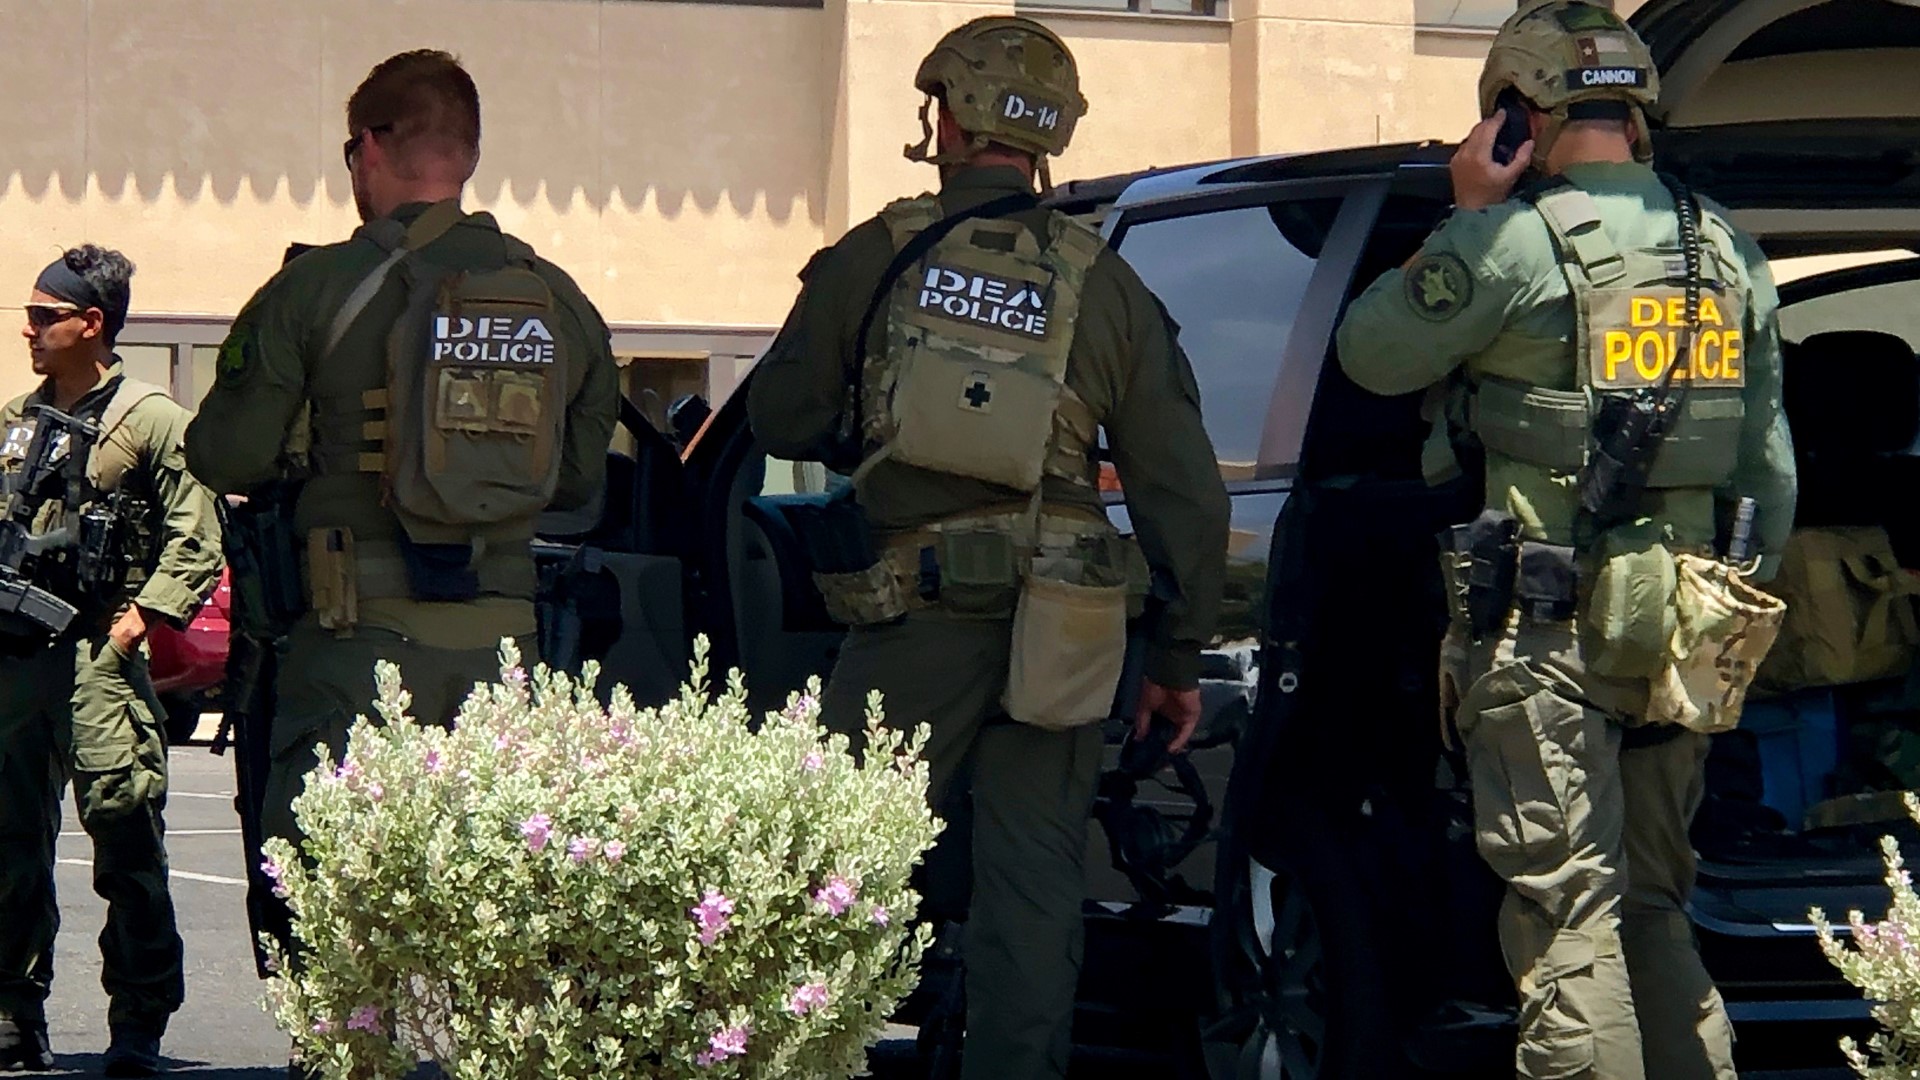 Texas Gov. Greg Abbott said Saturday evening that the state 'grieves for the people of El Paso today.' A shooting in El Paso had 20 people confirmed dead and more than 2 dozen injured.